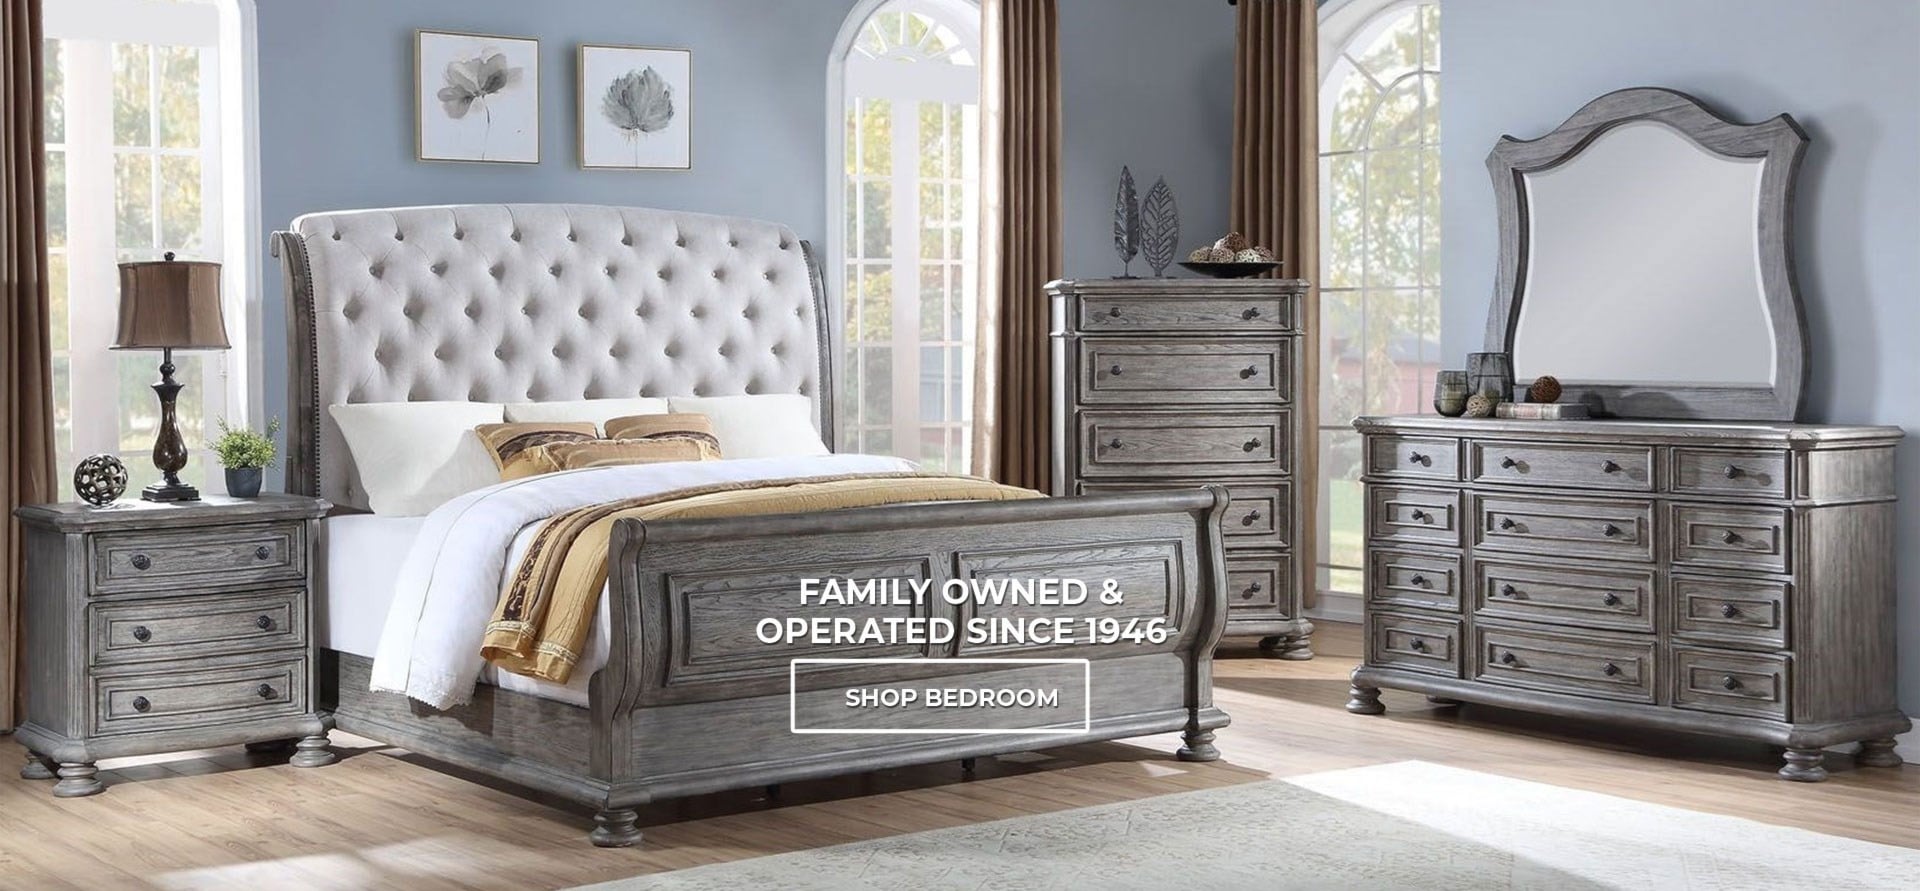 family owned & operated since 1946 | shop bedroom